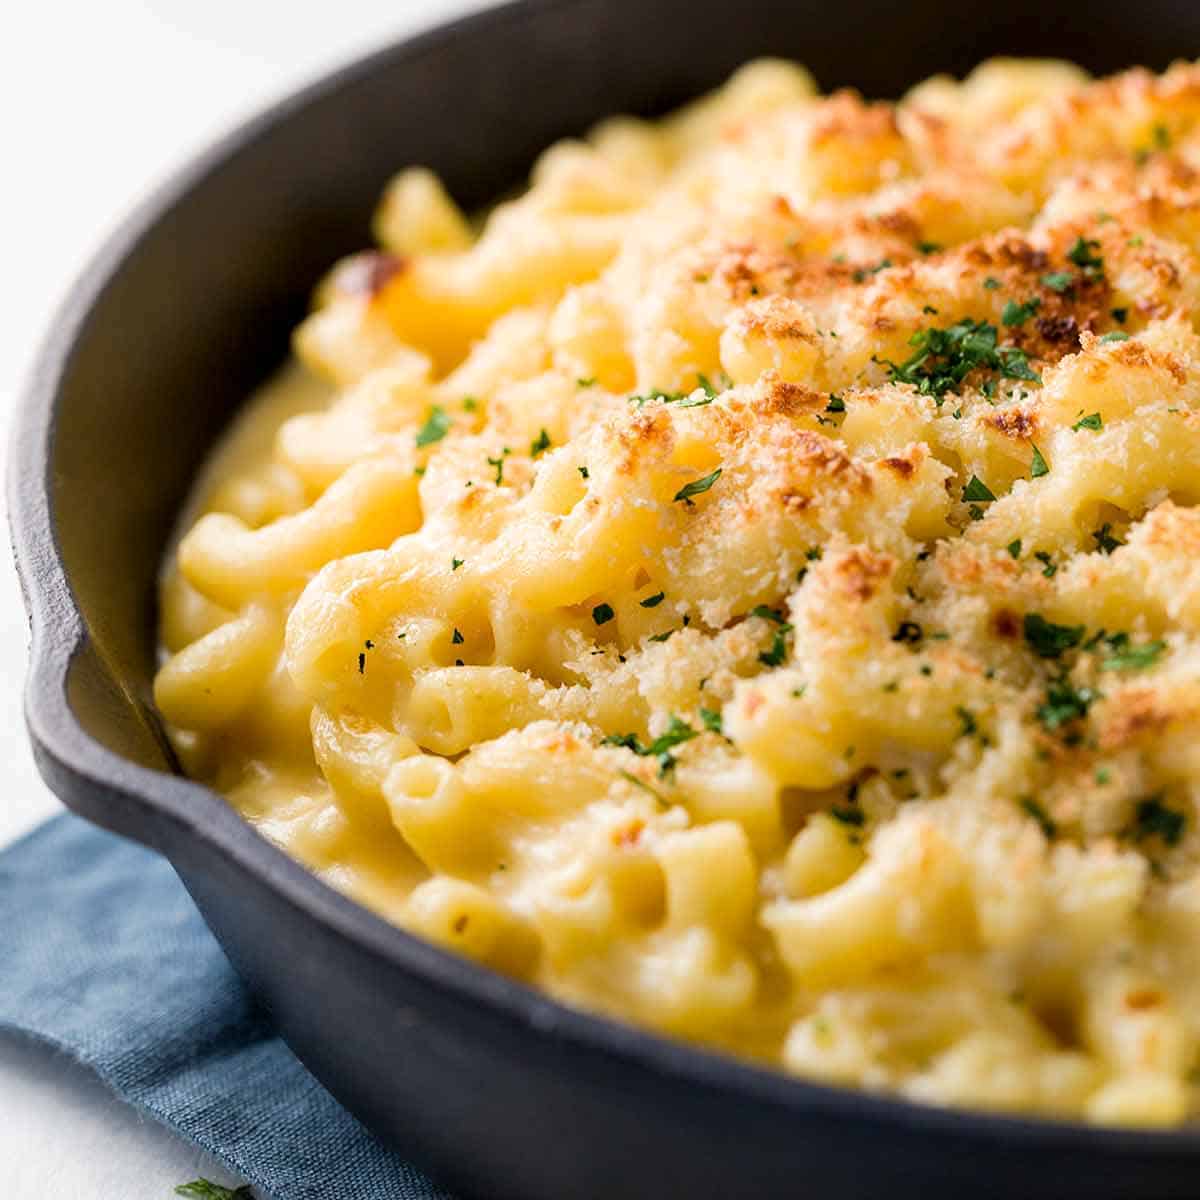 make a crust for baked mac and cheese